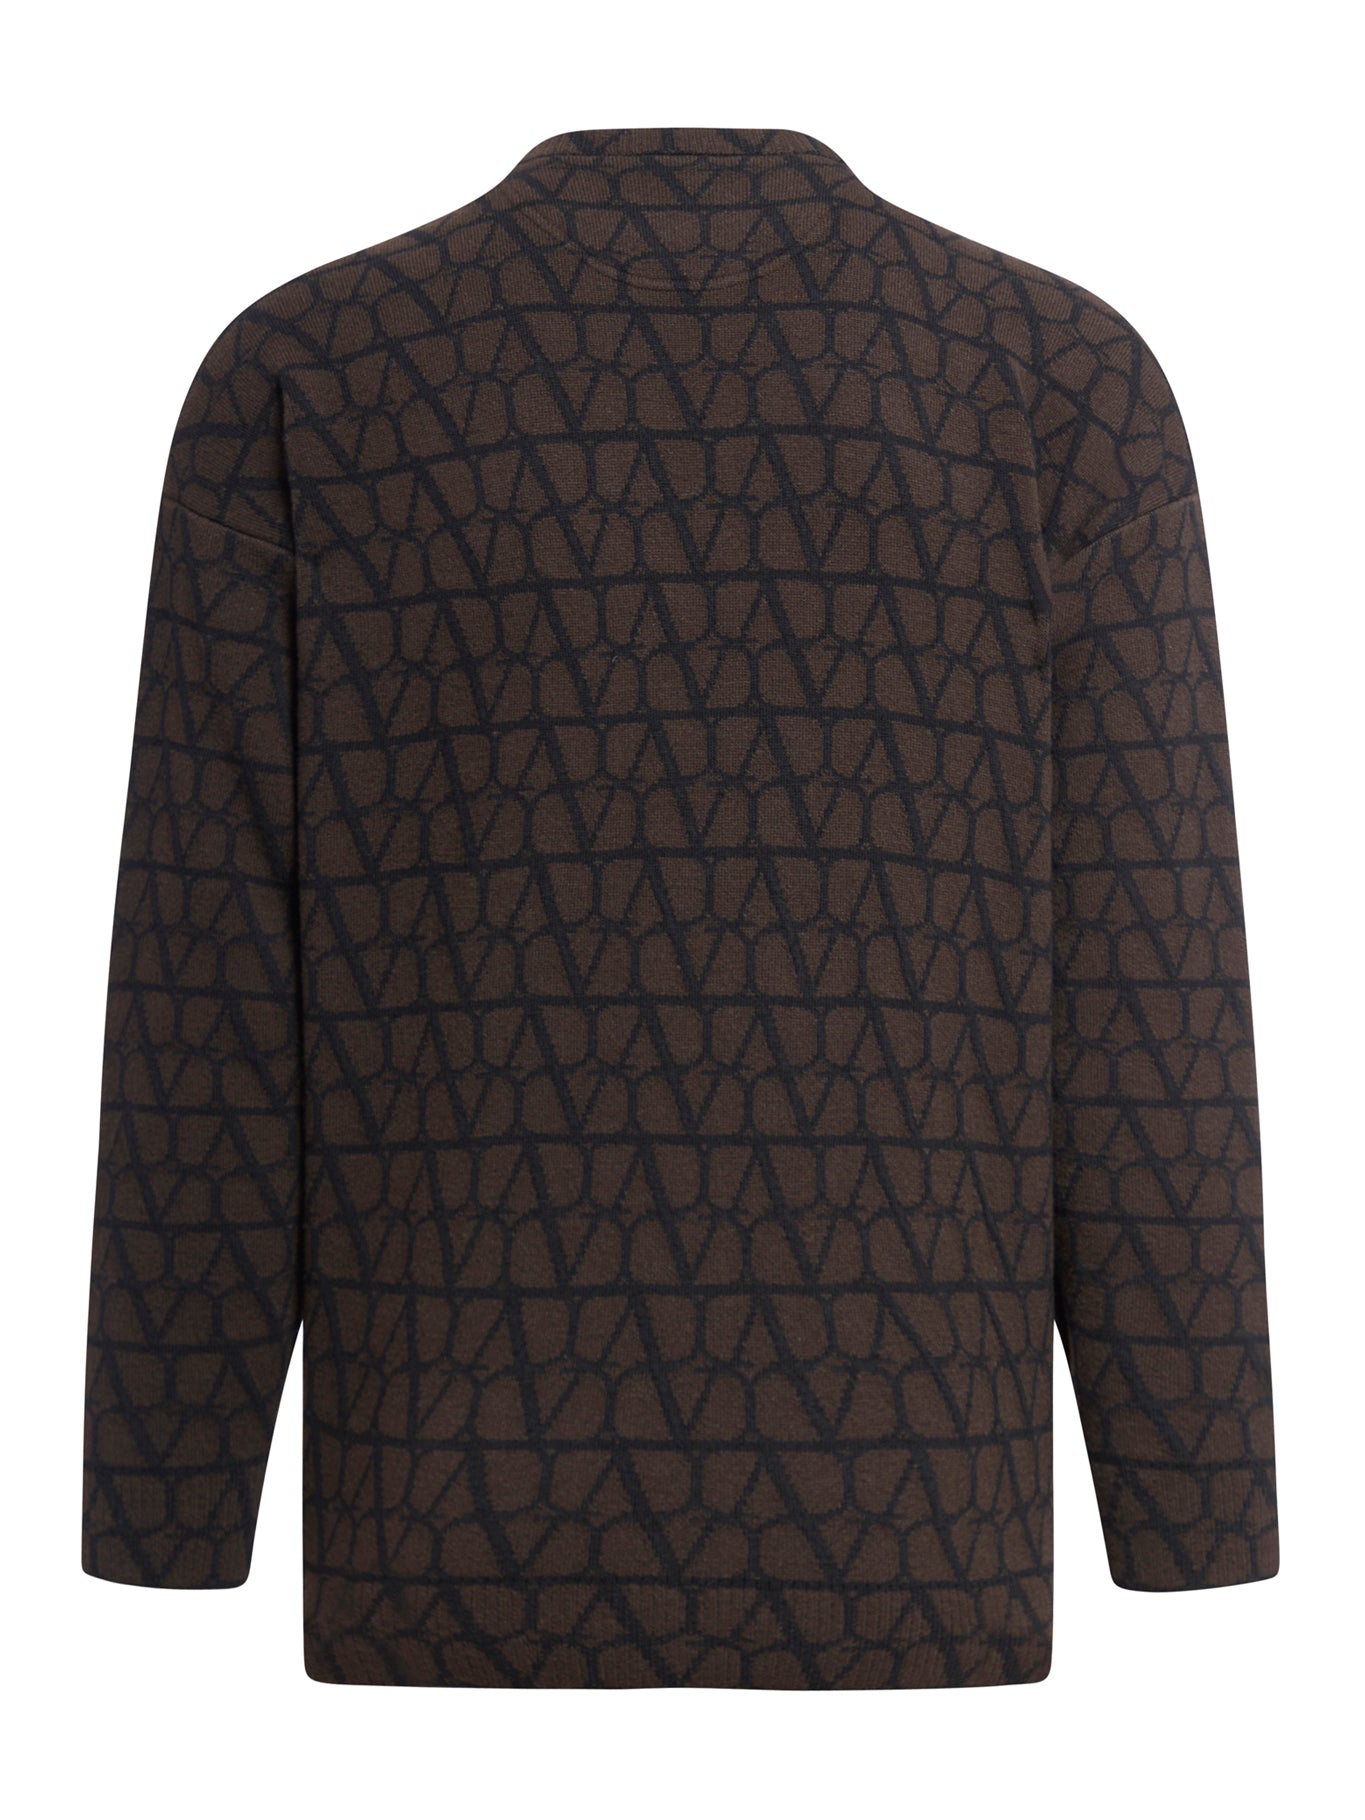 CREWNECK WOOL SWEATER WITH TOILE ICONOGRAPHE PATTERN